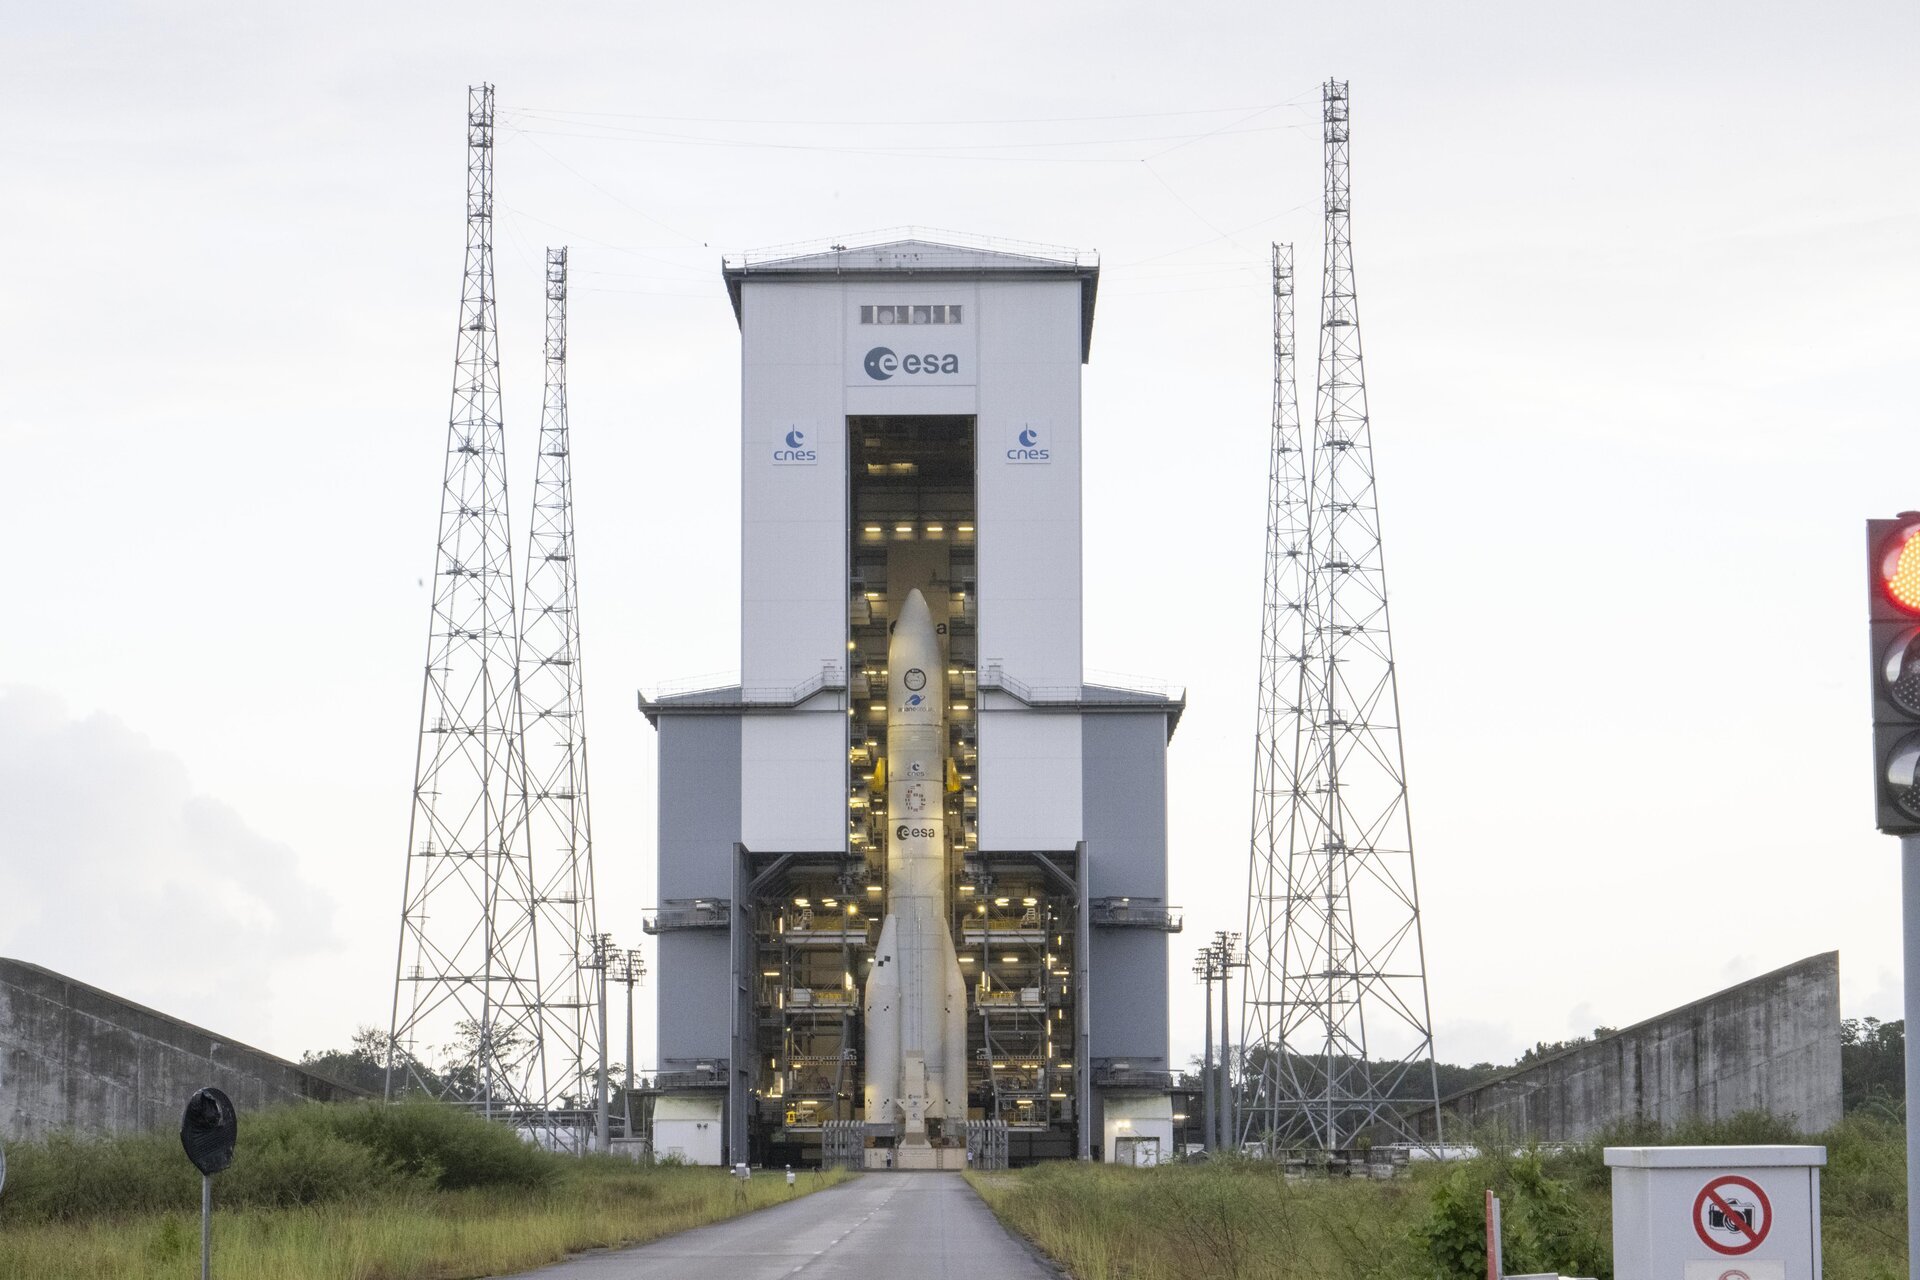 ESA’s new heavy-lift rocket, Ariane 6, is poised to launch for the first time on Tuesday